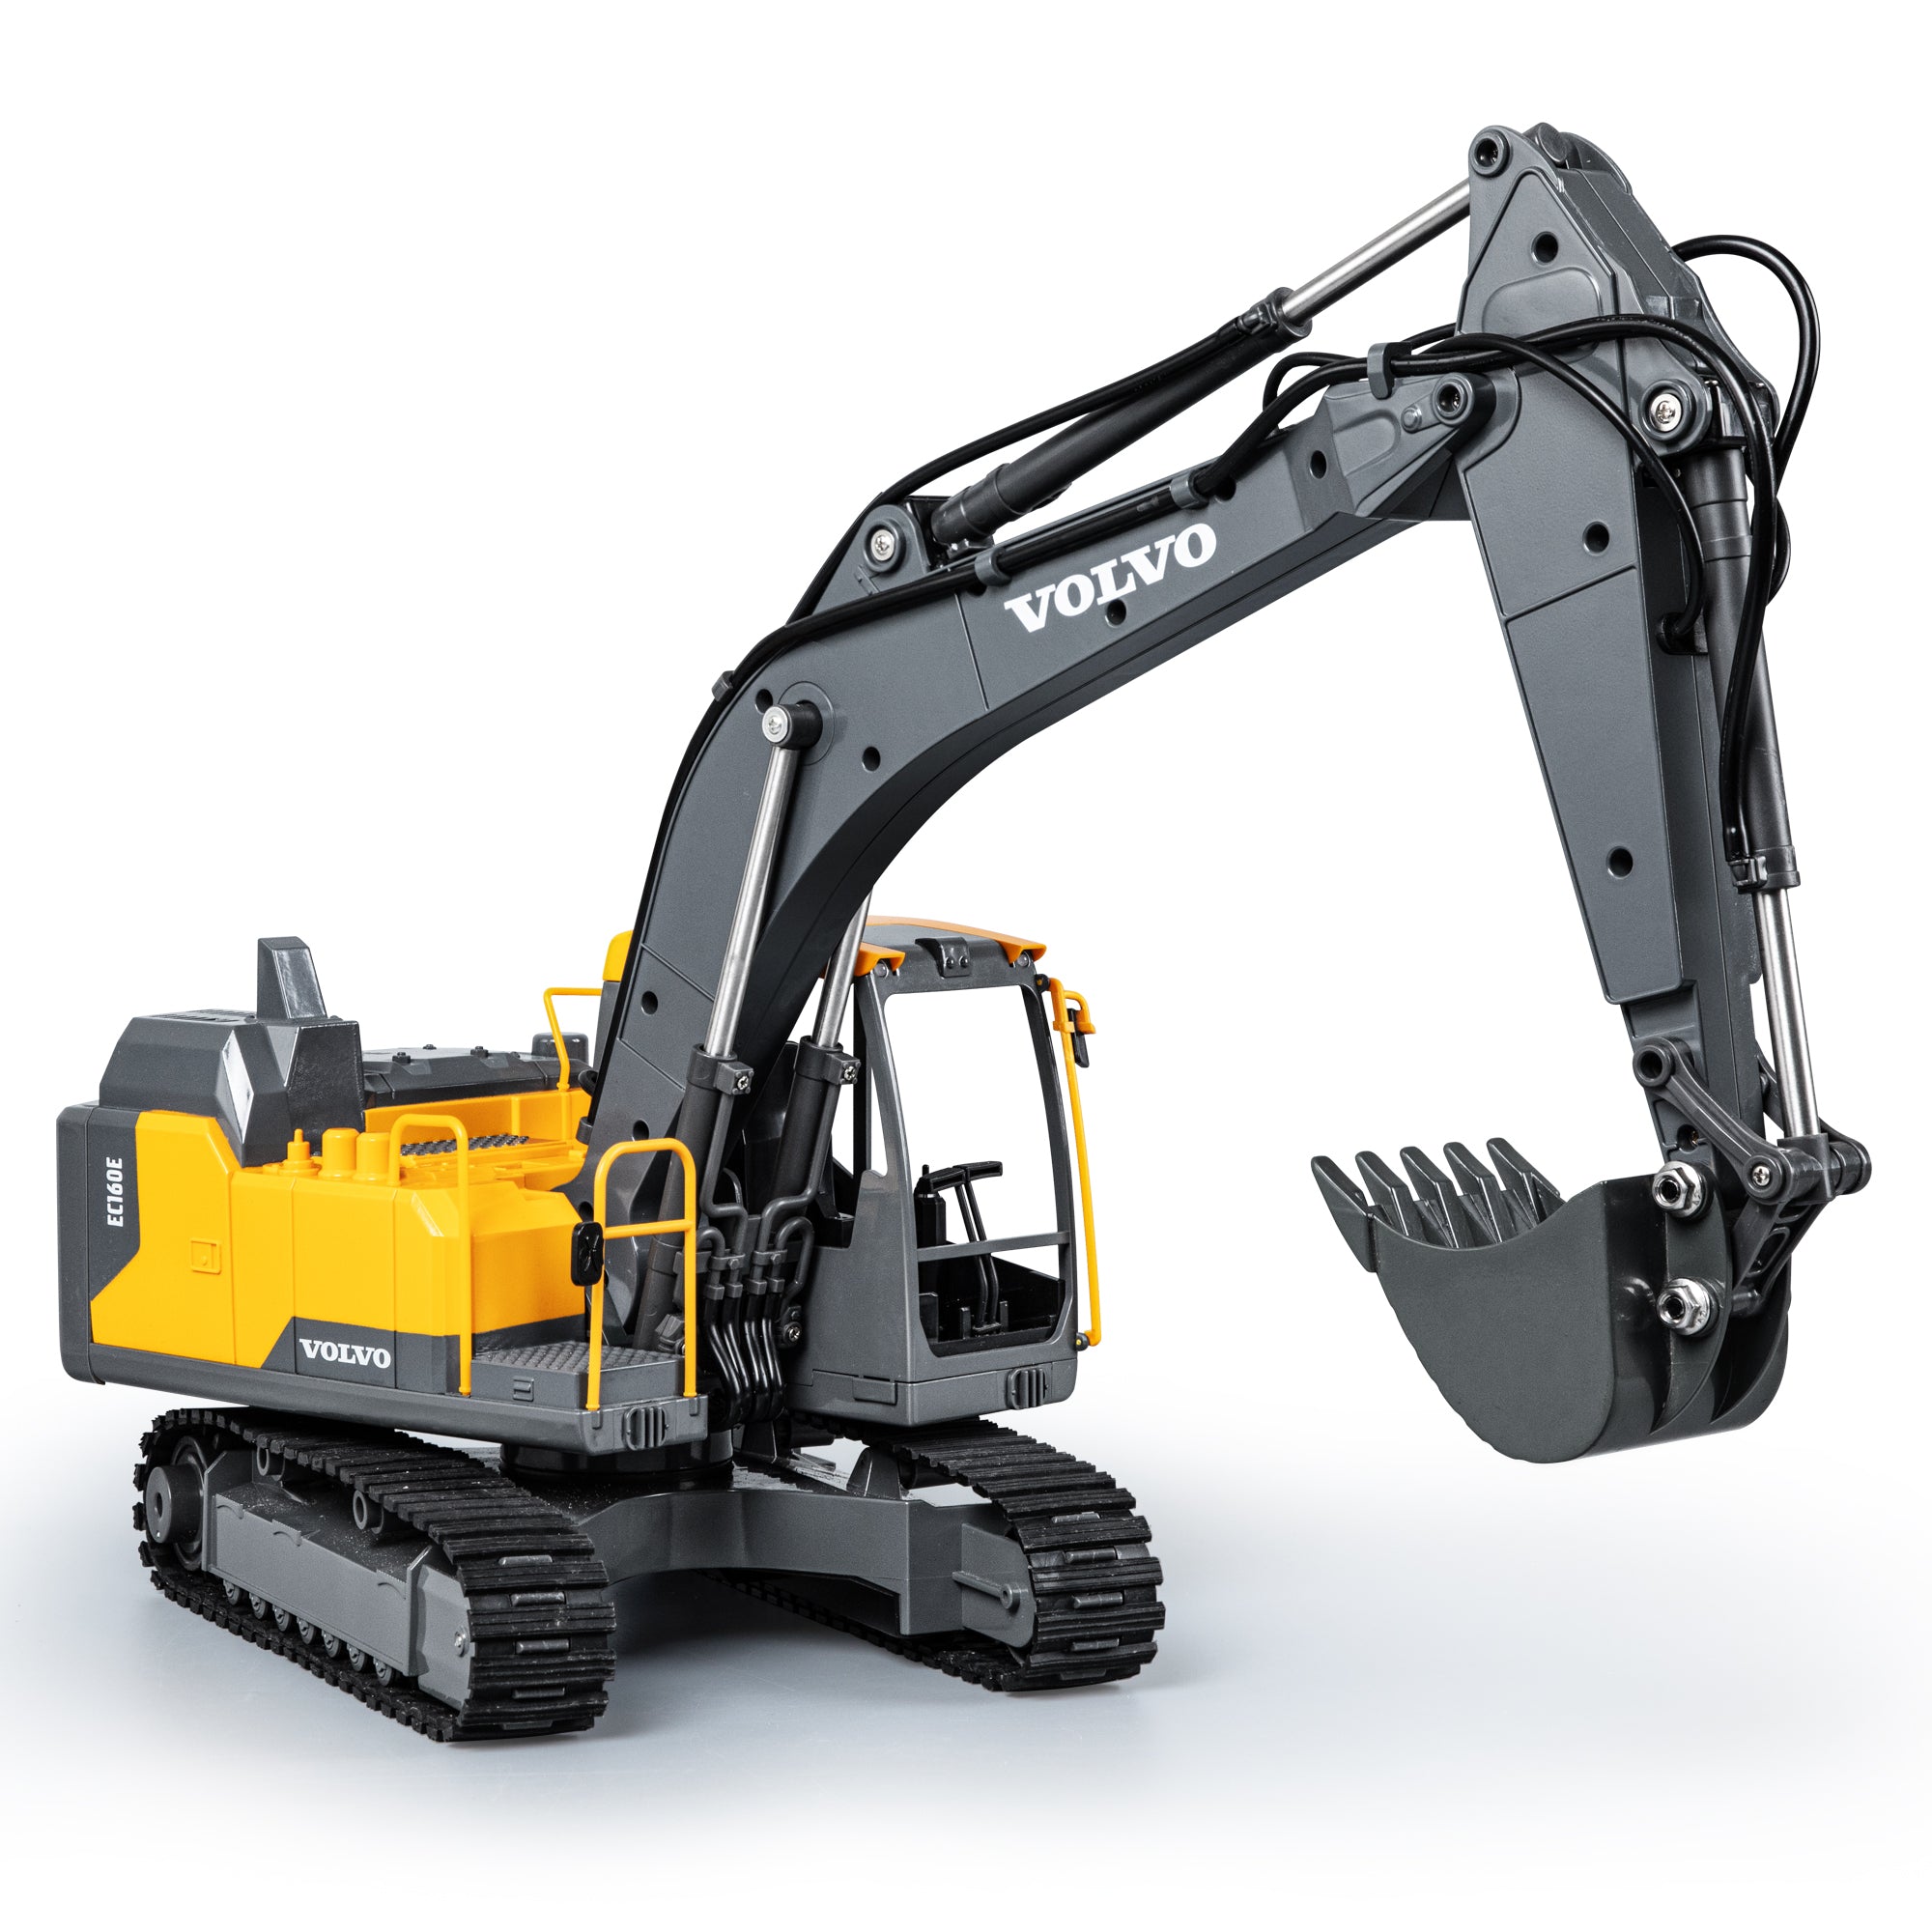 Double E VOLVO RC Fully Functional Excavator | E598-003